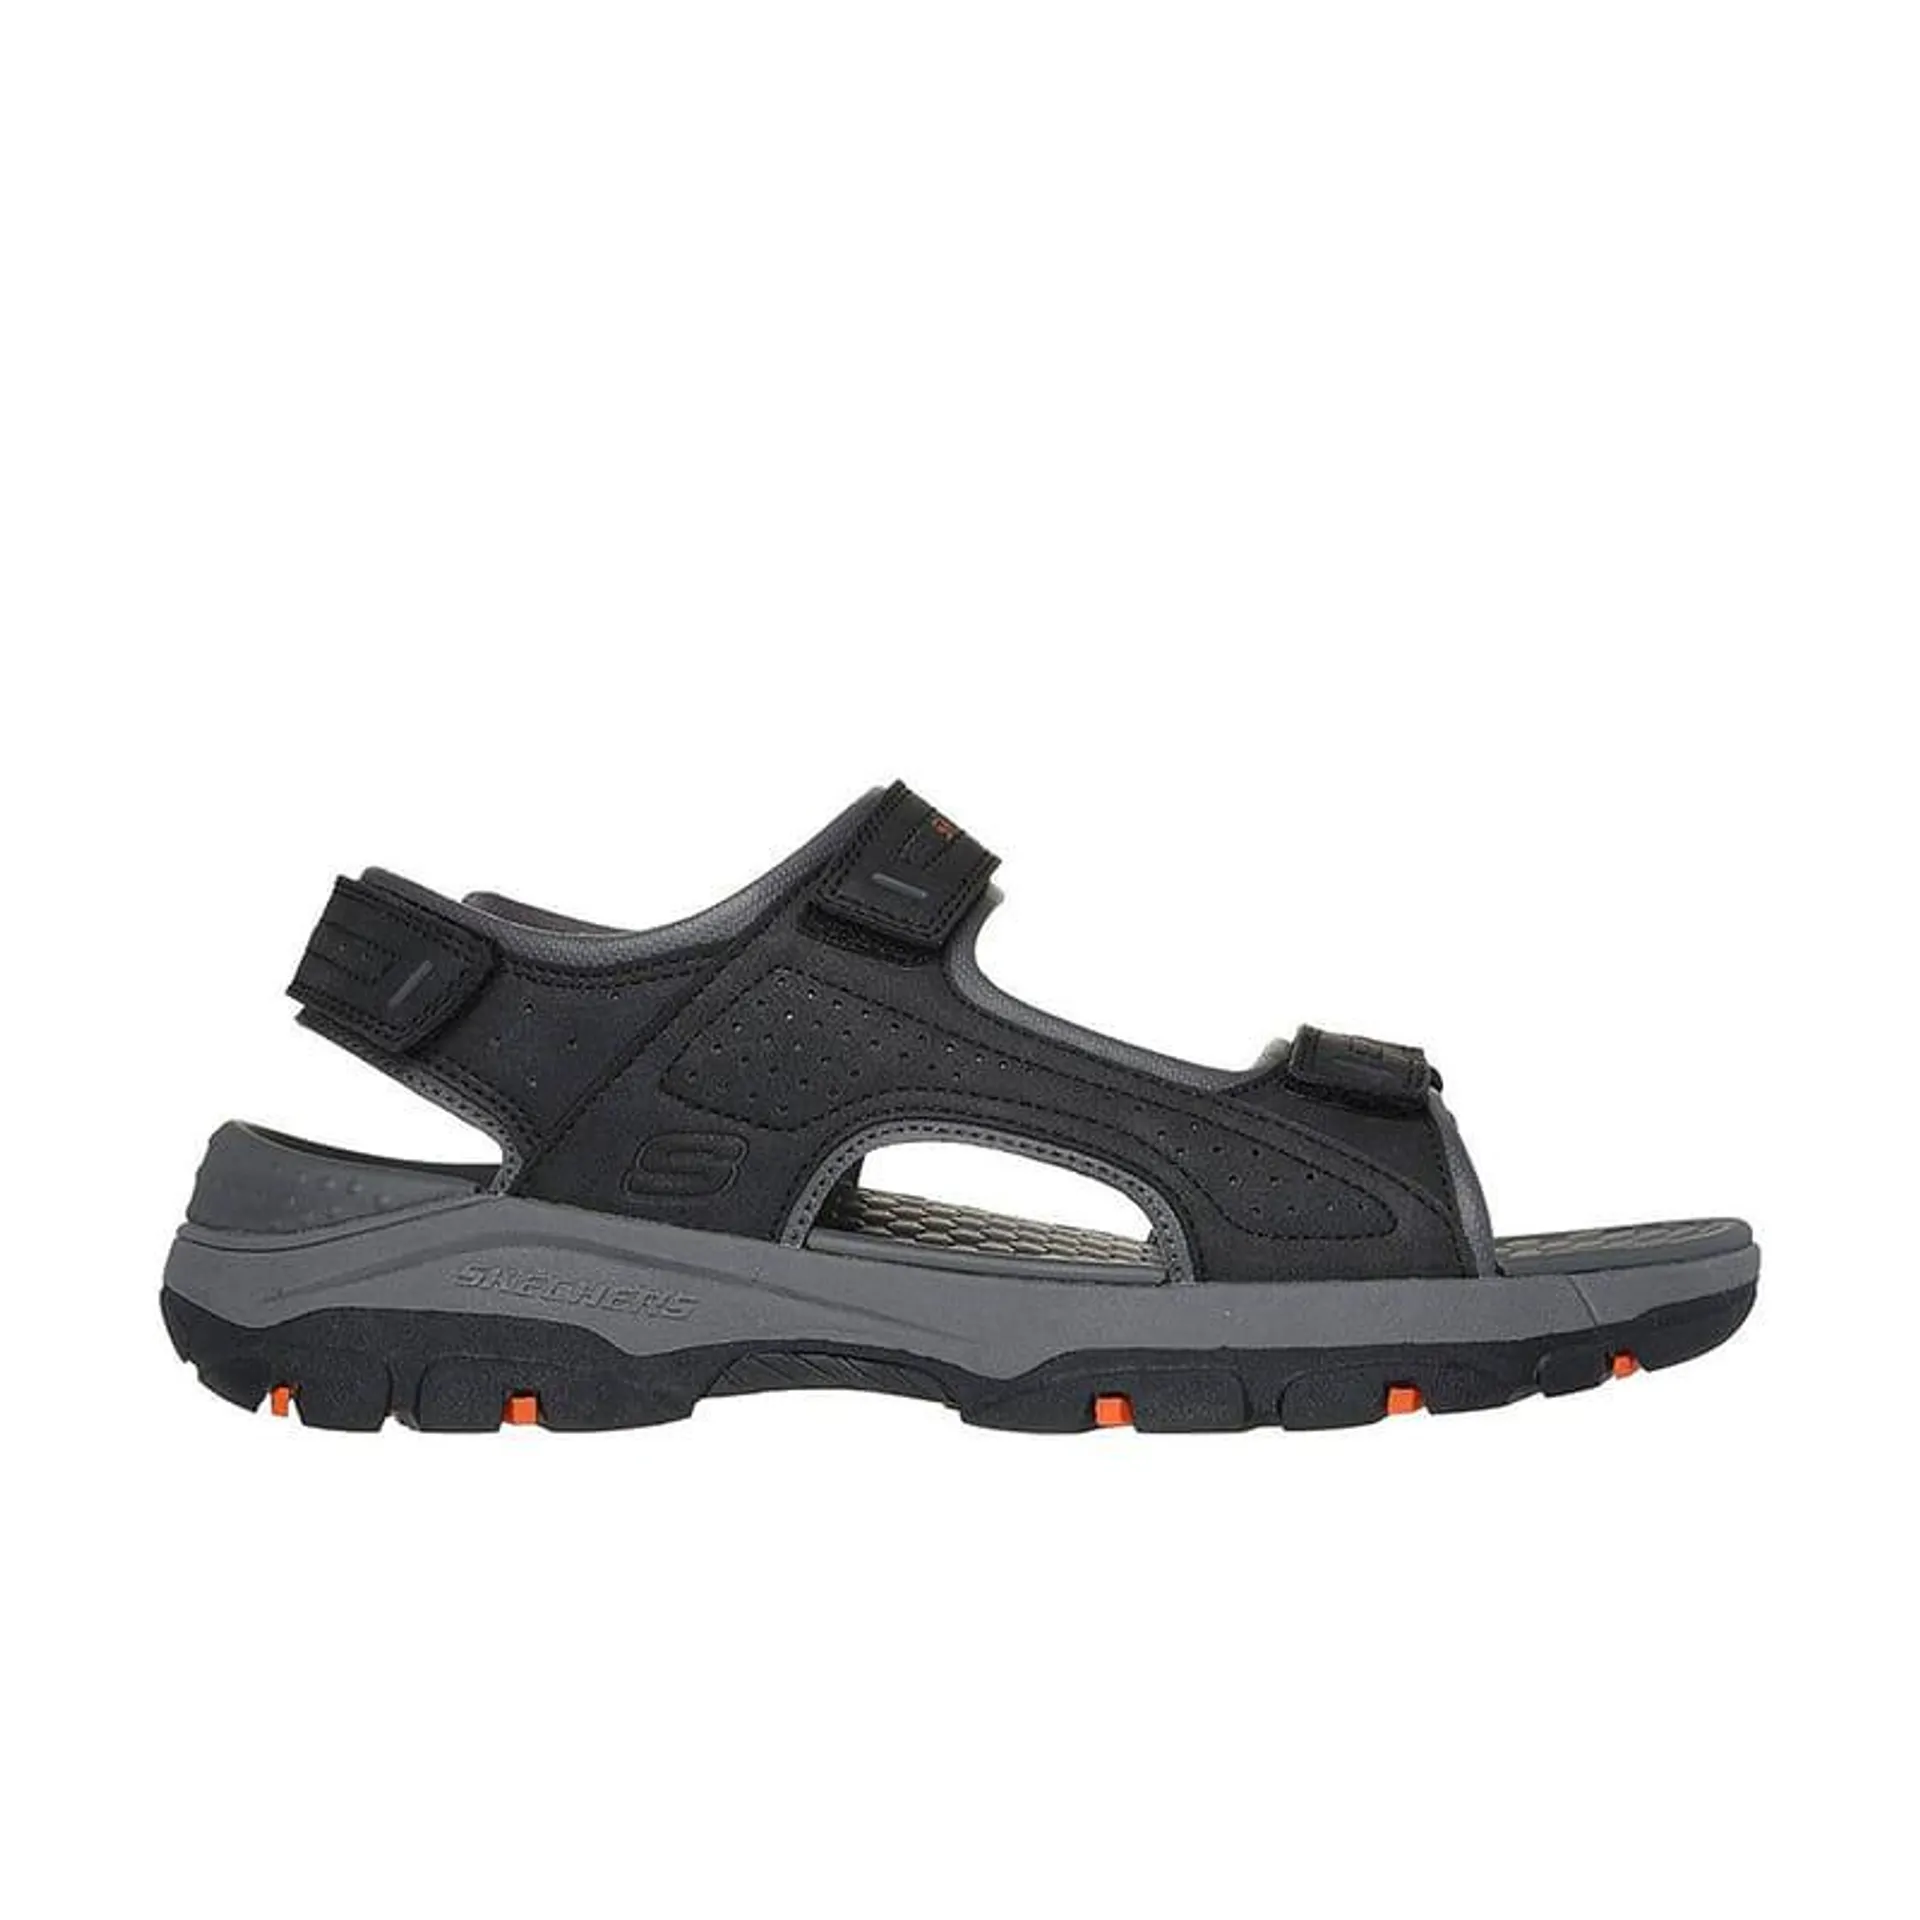 Sandalia Skechers Casual Hombre Relaxed Fit Tresmen Negro